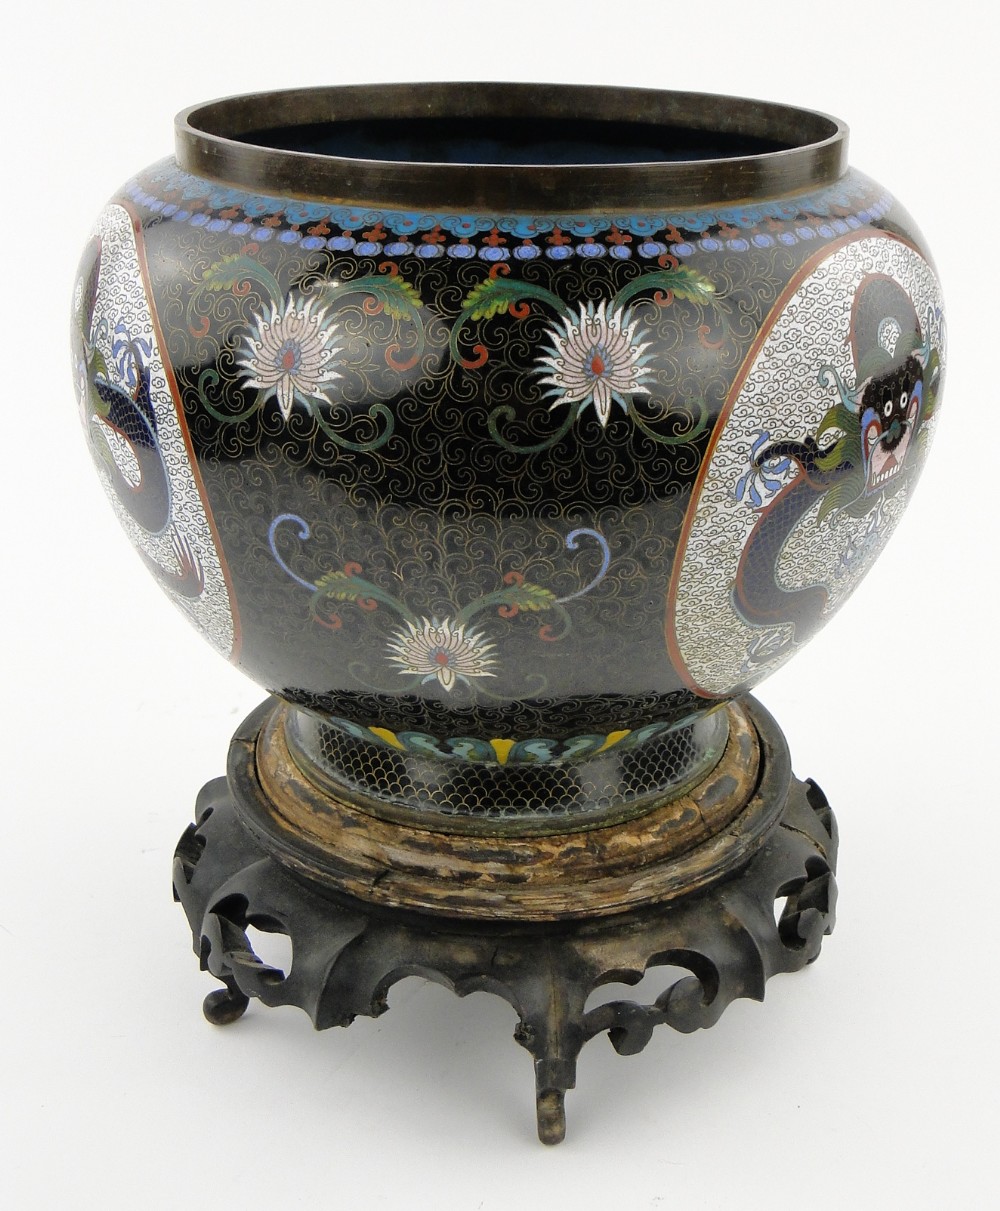 A black ground Cloisonne bowl
with dragon decorated panels, height 9.5", on carved wood stand. - Image 4 of 7